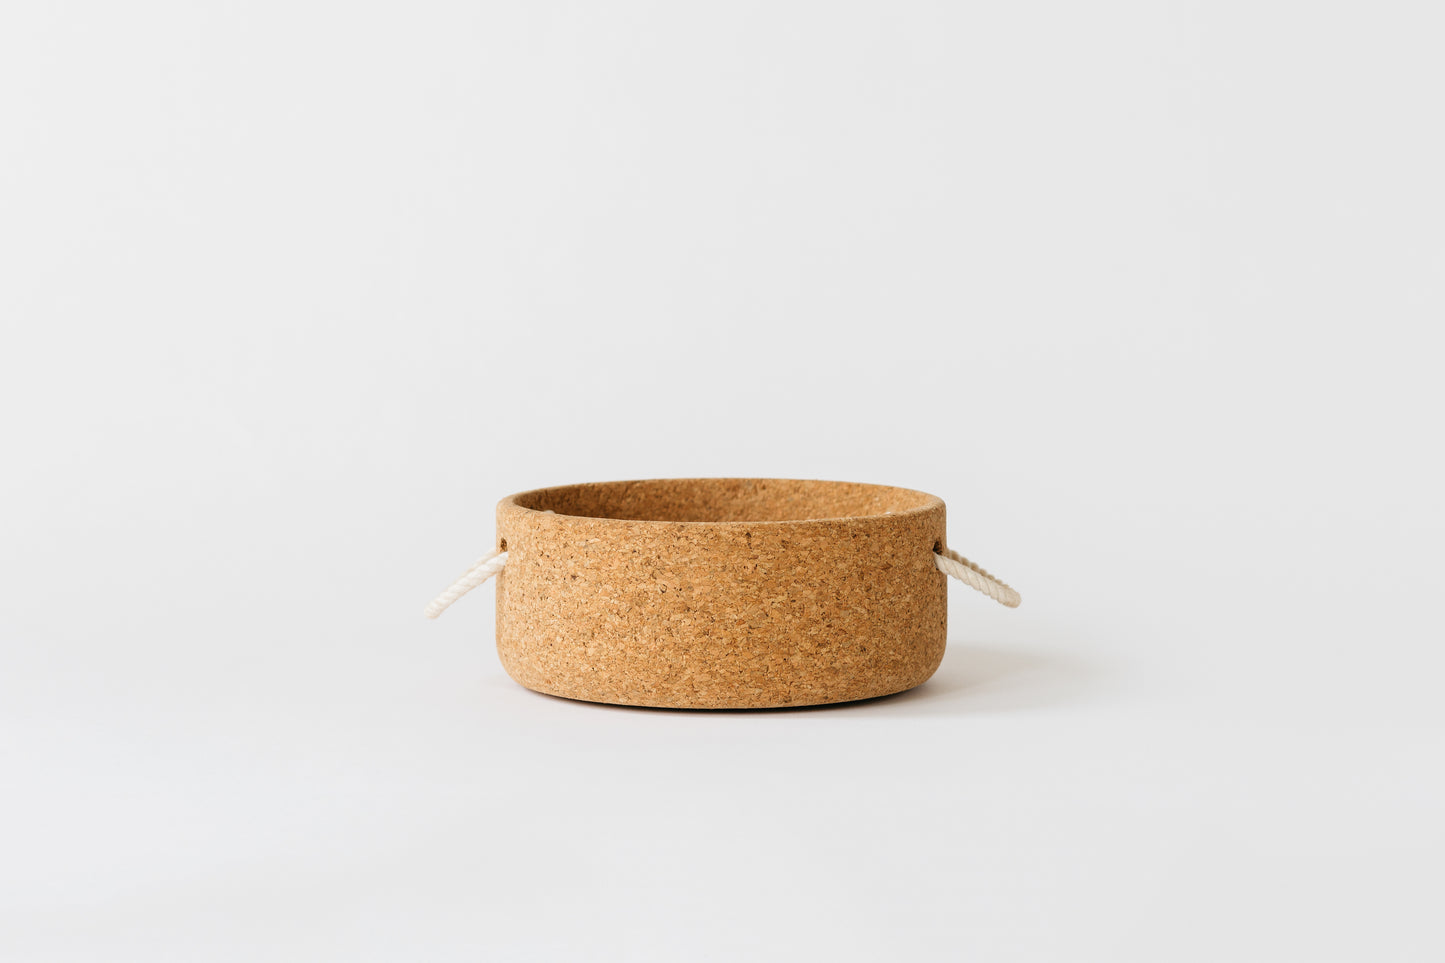 Large cork bowl with natural rope handles by Melanie Abrantes Designs.